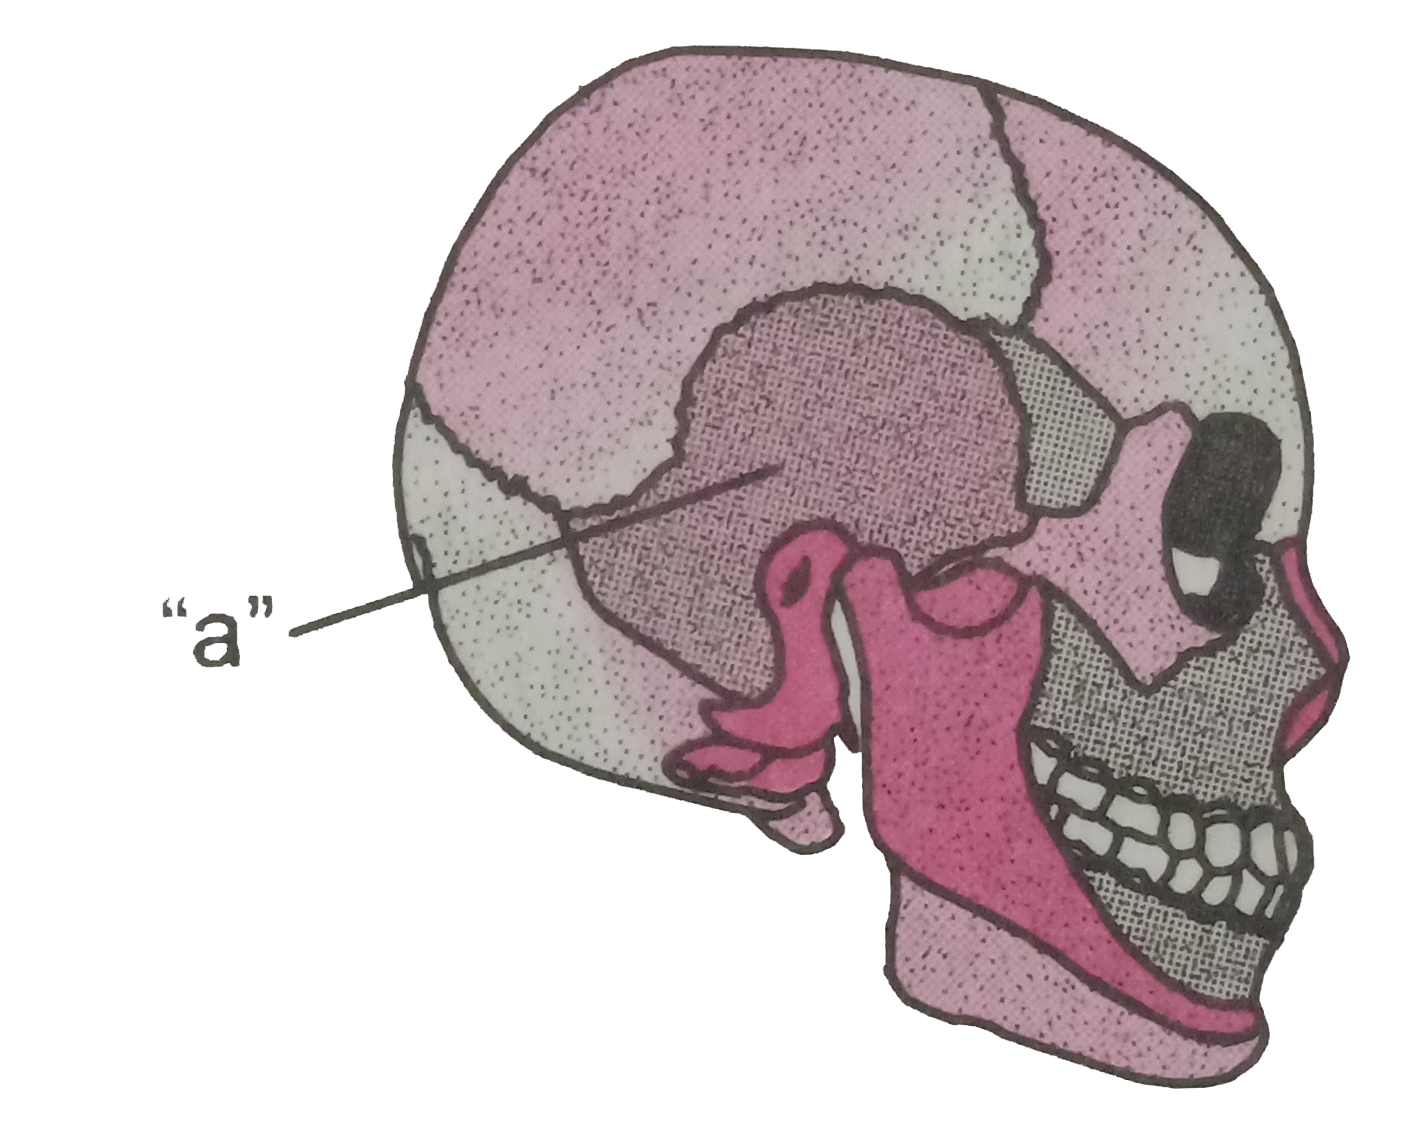 In the diagram of skull, what does